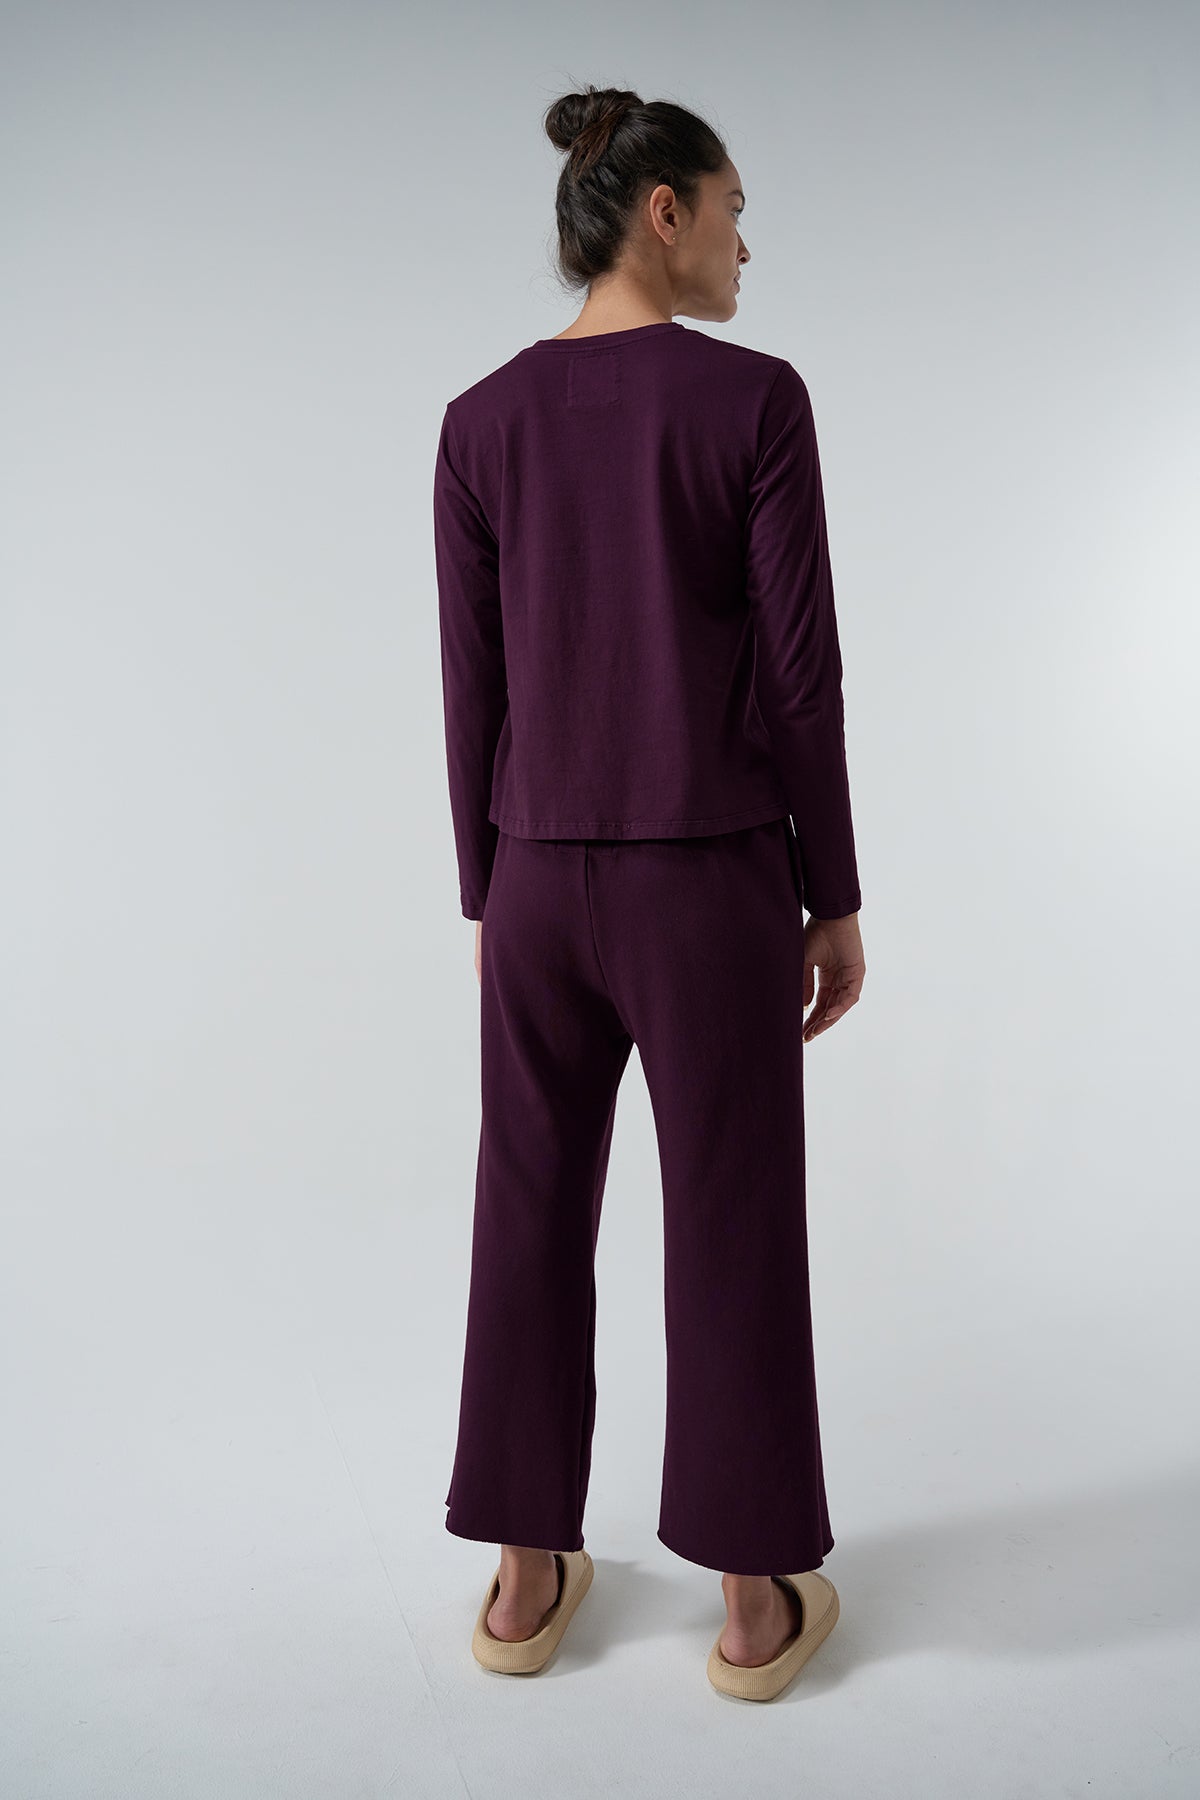   Vicente Tee Mulberry with Montecito Sweatpant Mulberry Back  